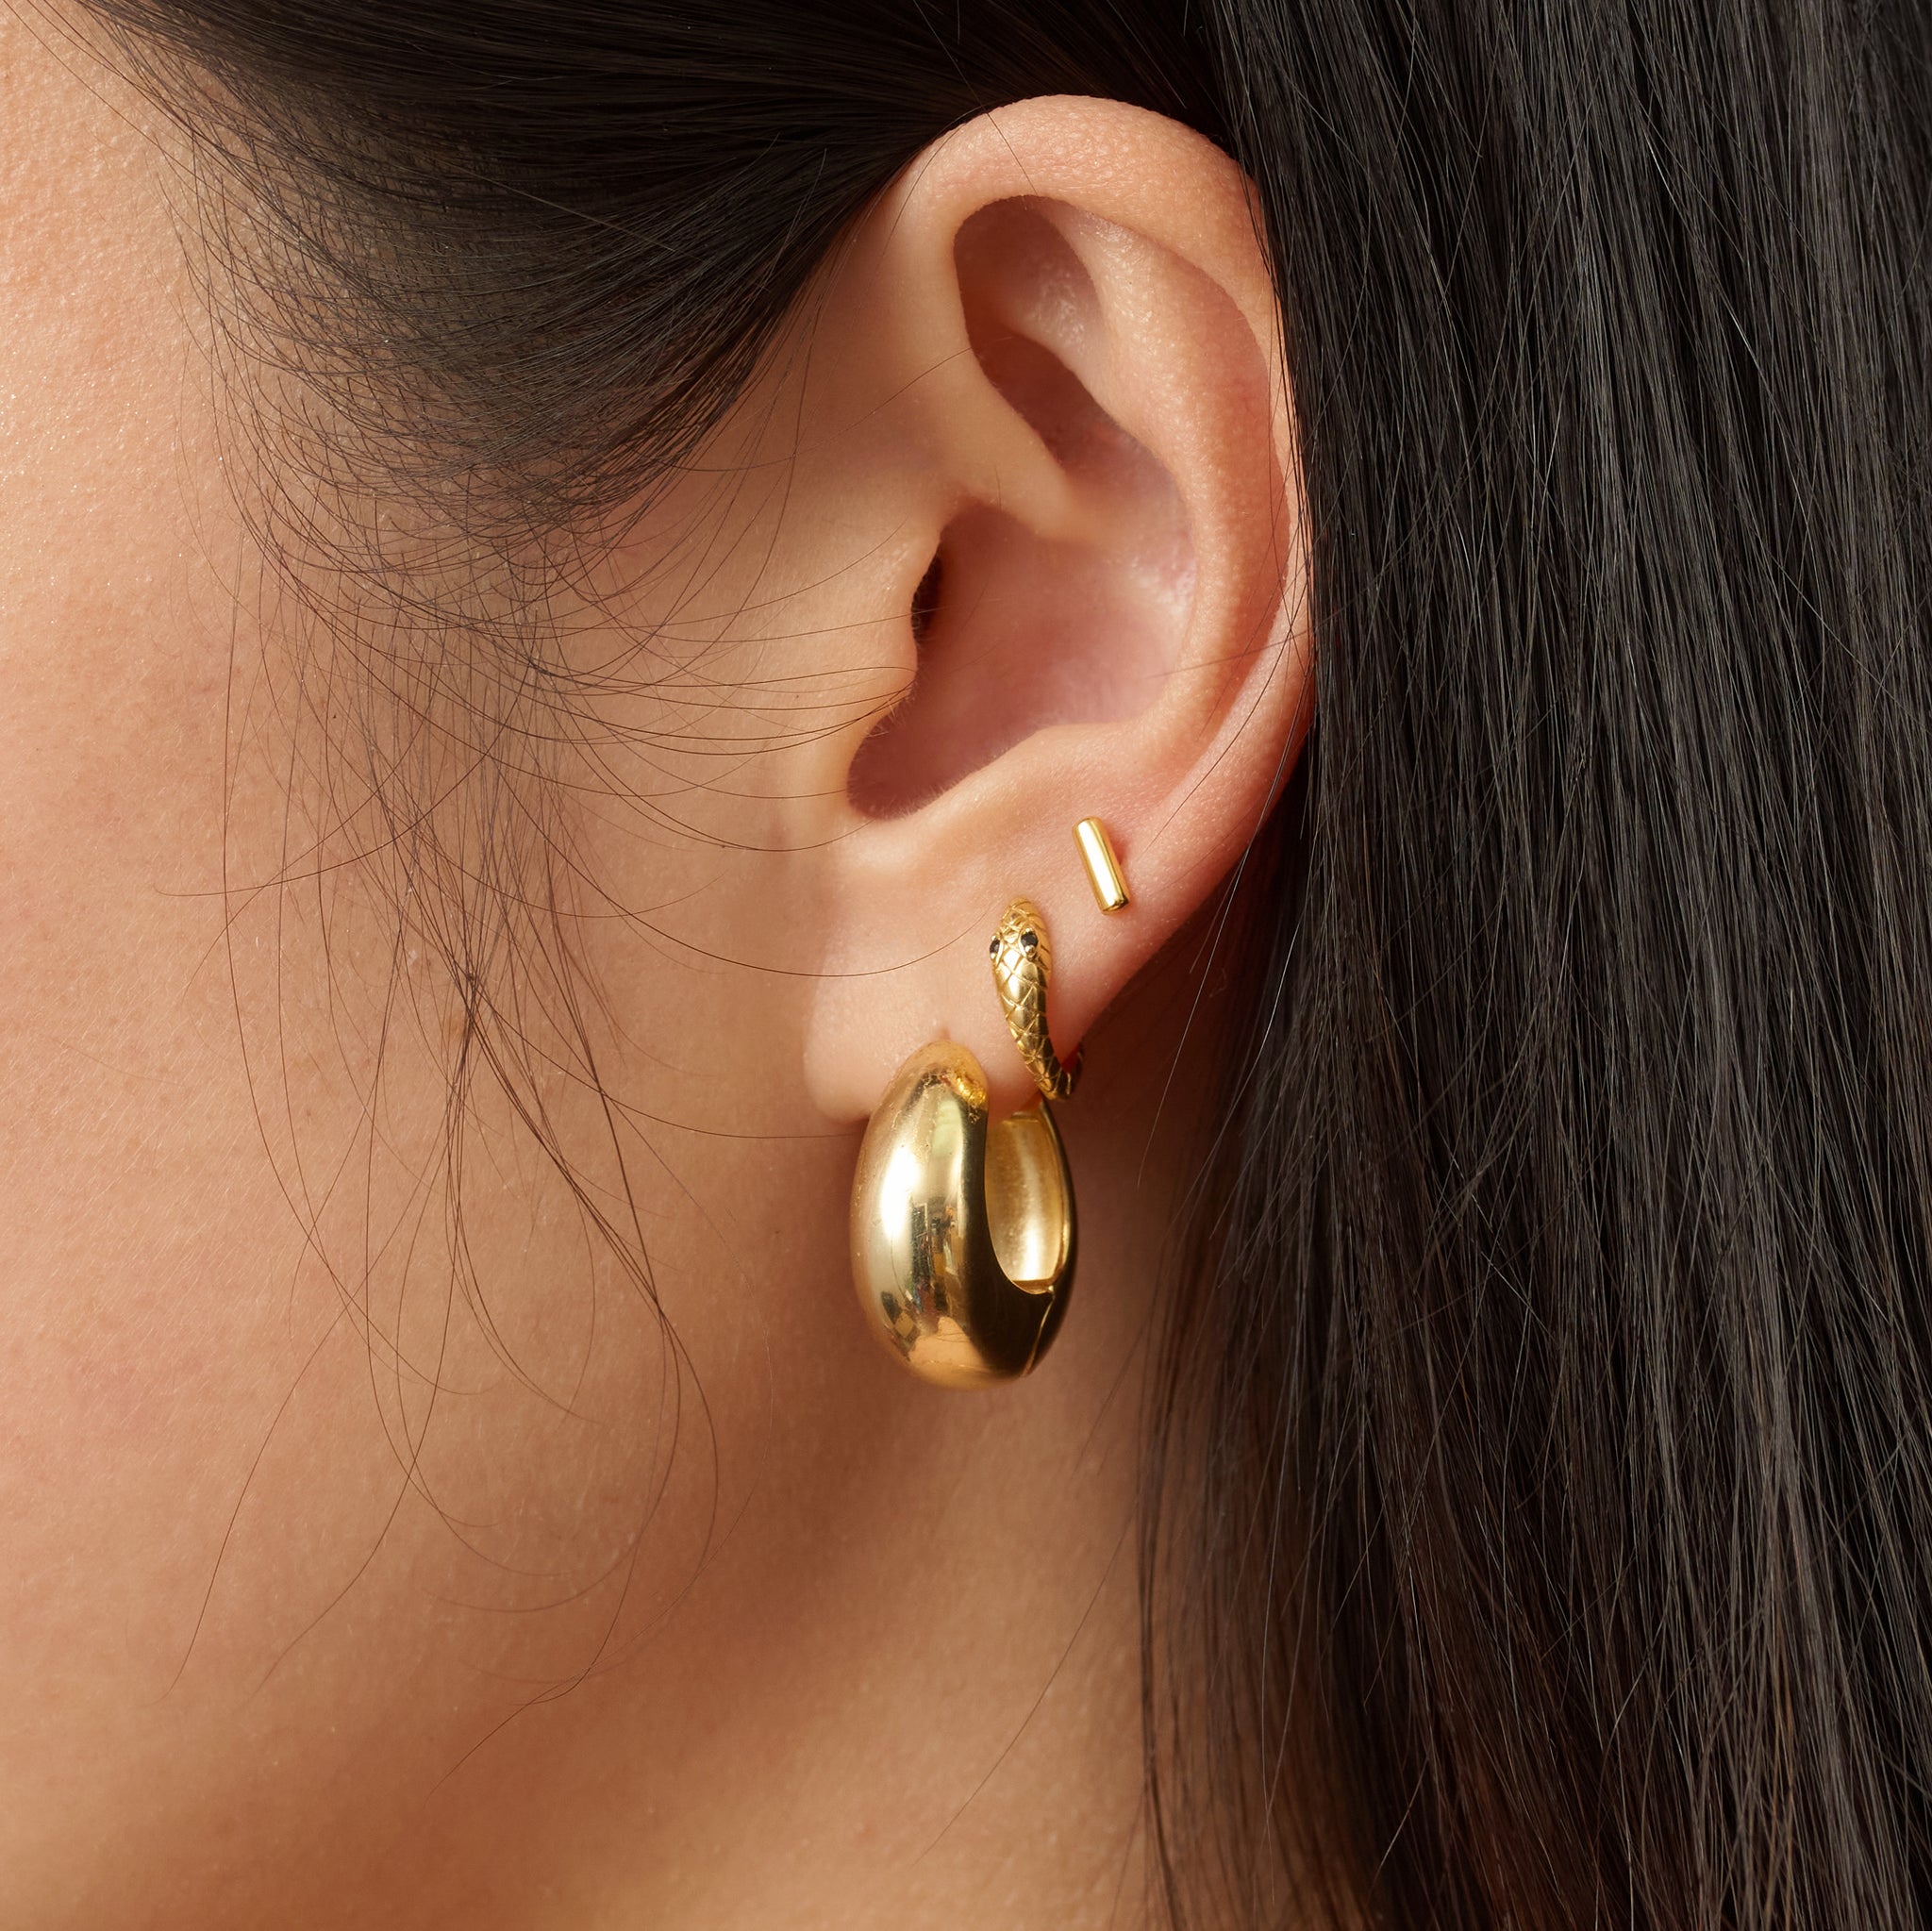 Everyday fine/semi-fine earrings in NYC that not irritate your 